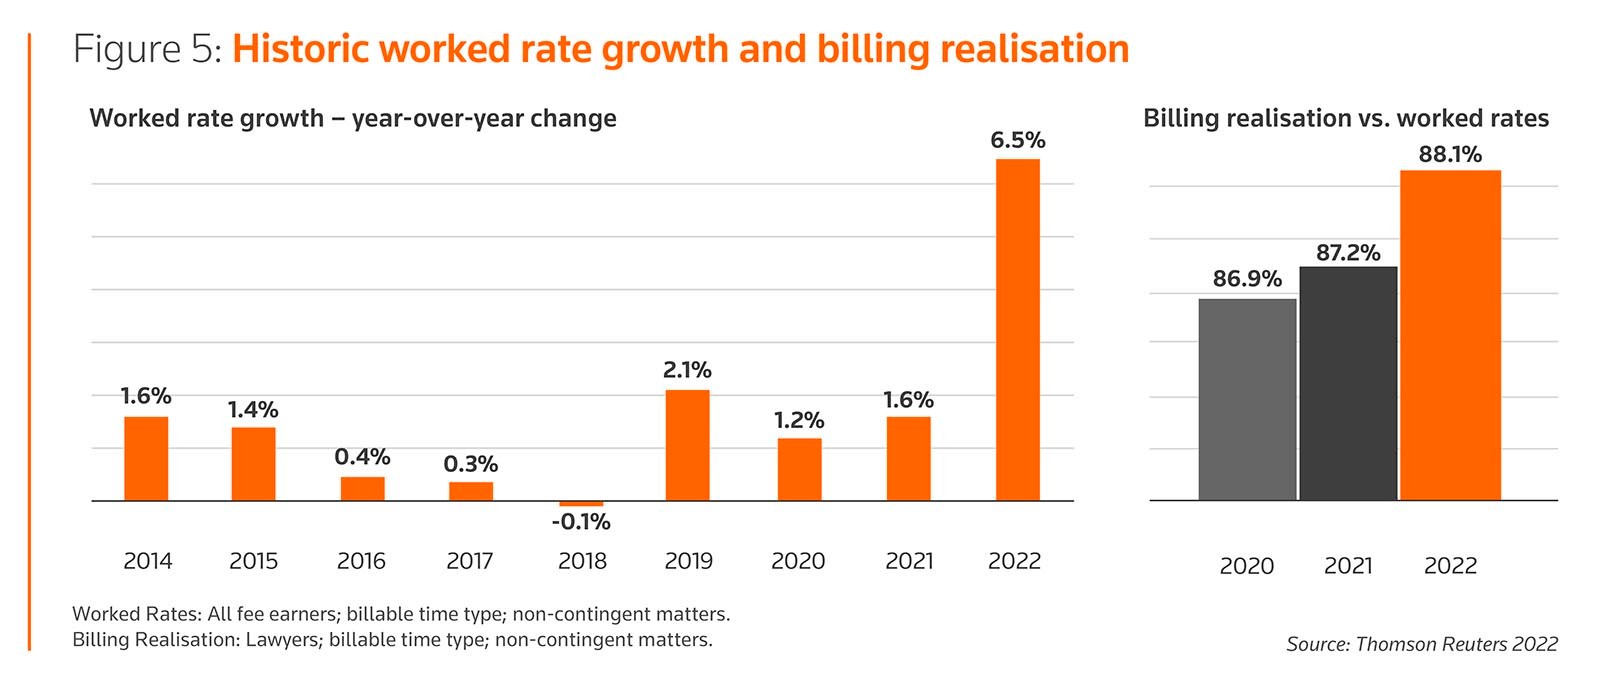 Historic worked rate growth and billing realisation